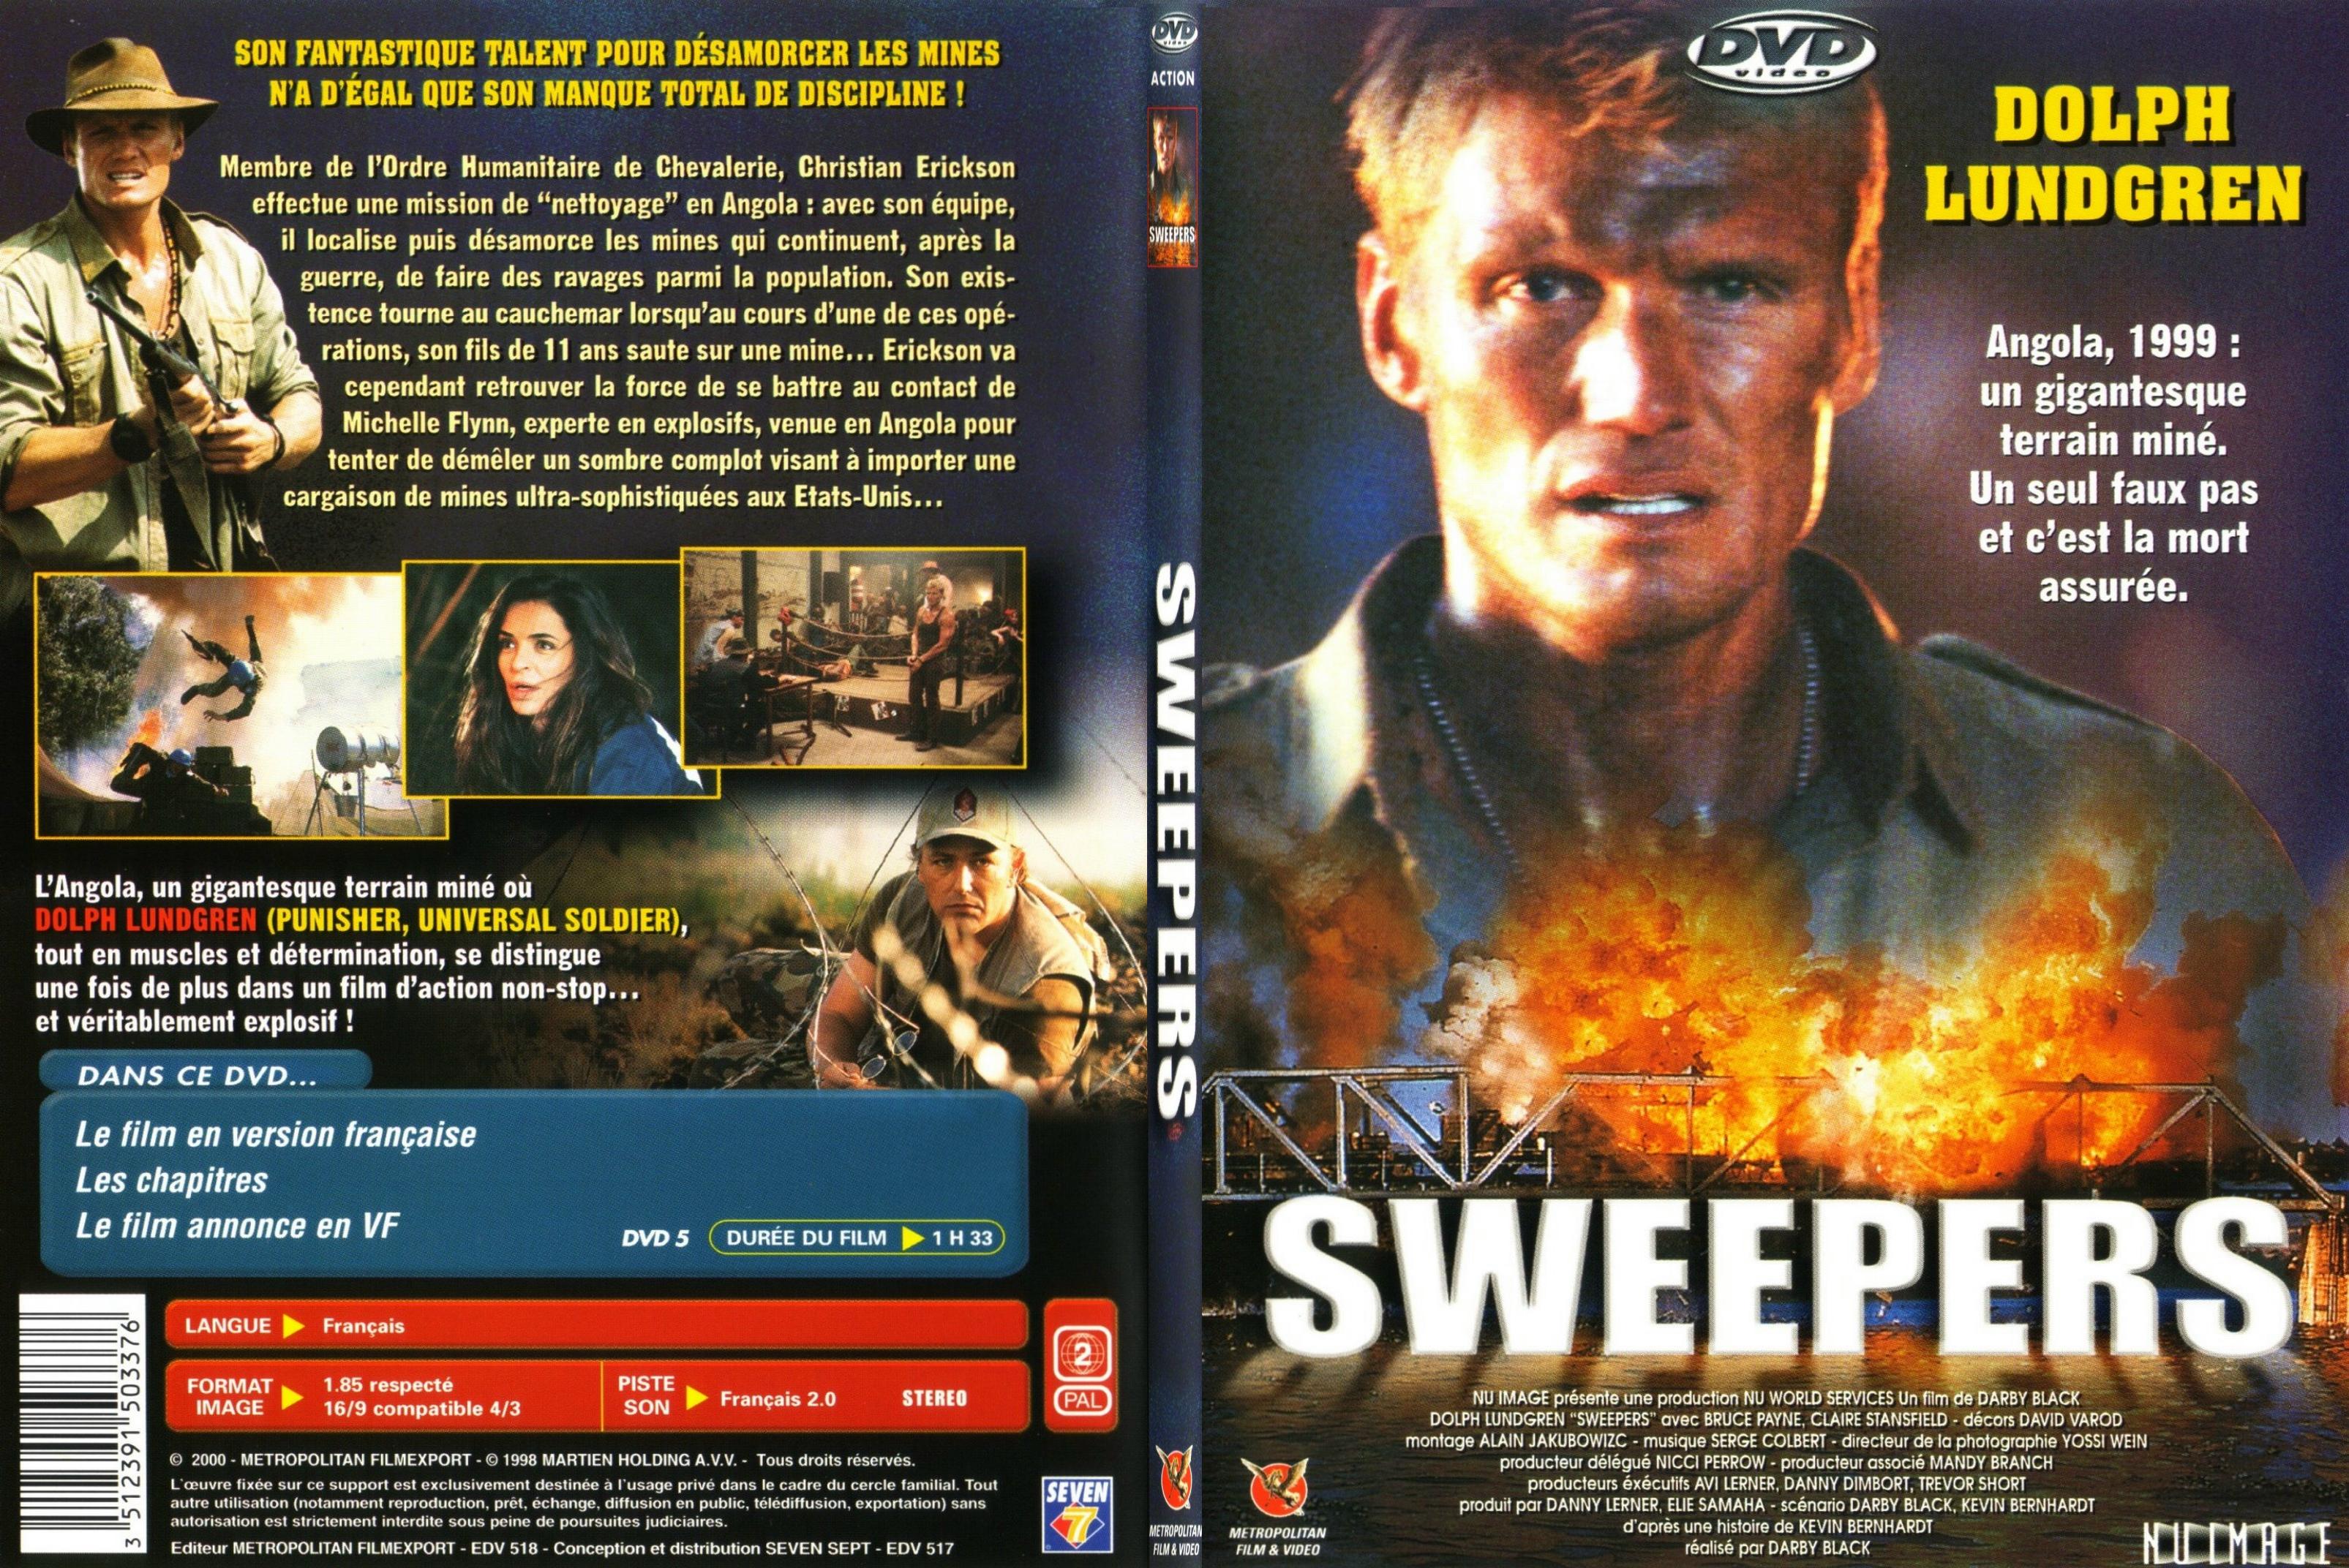 Jaquette DVD Sweepers - SLIM